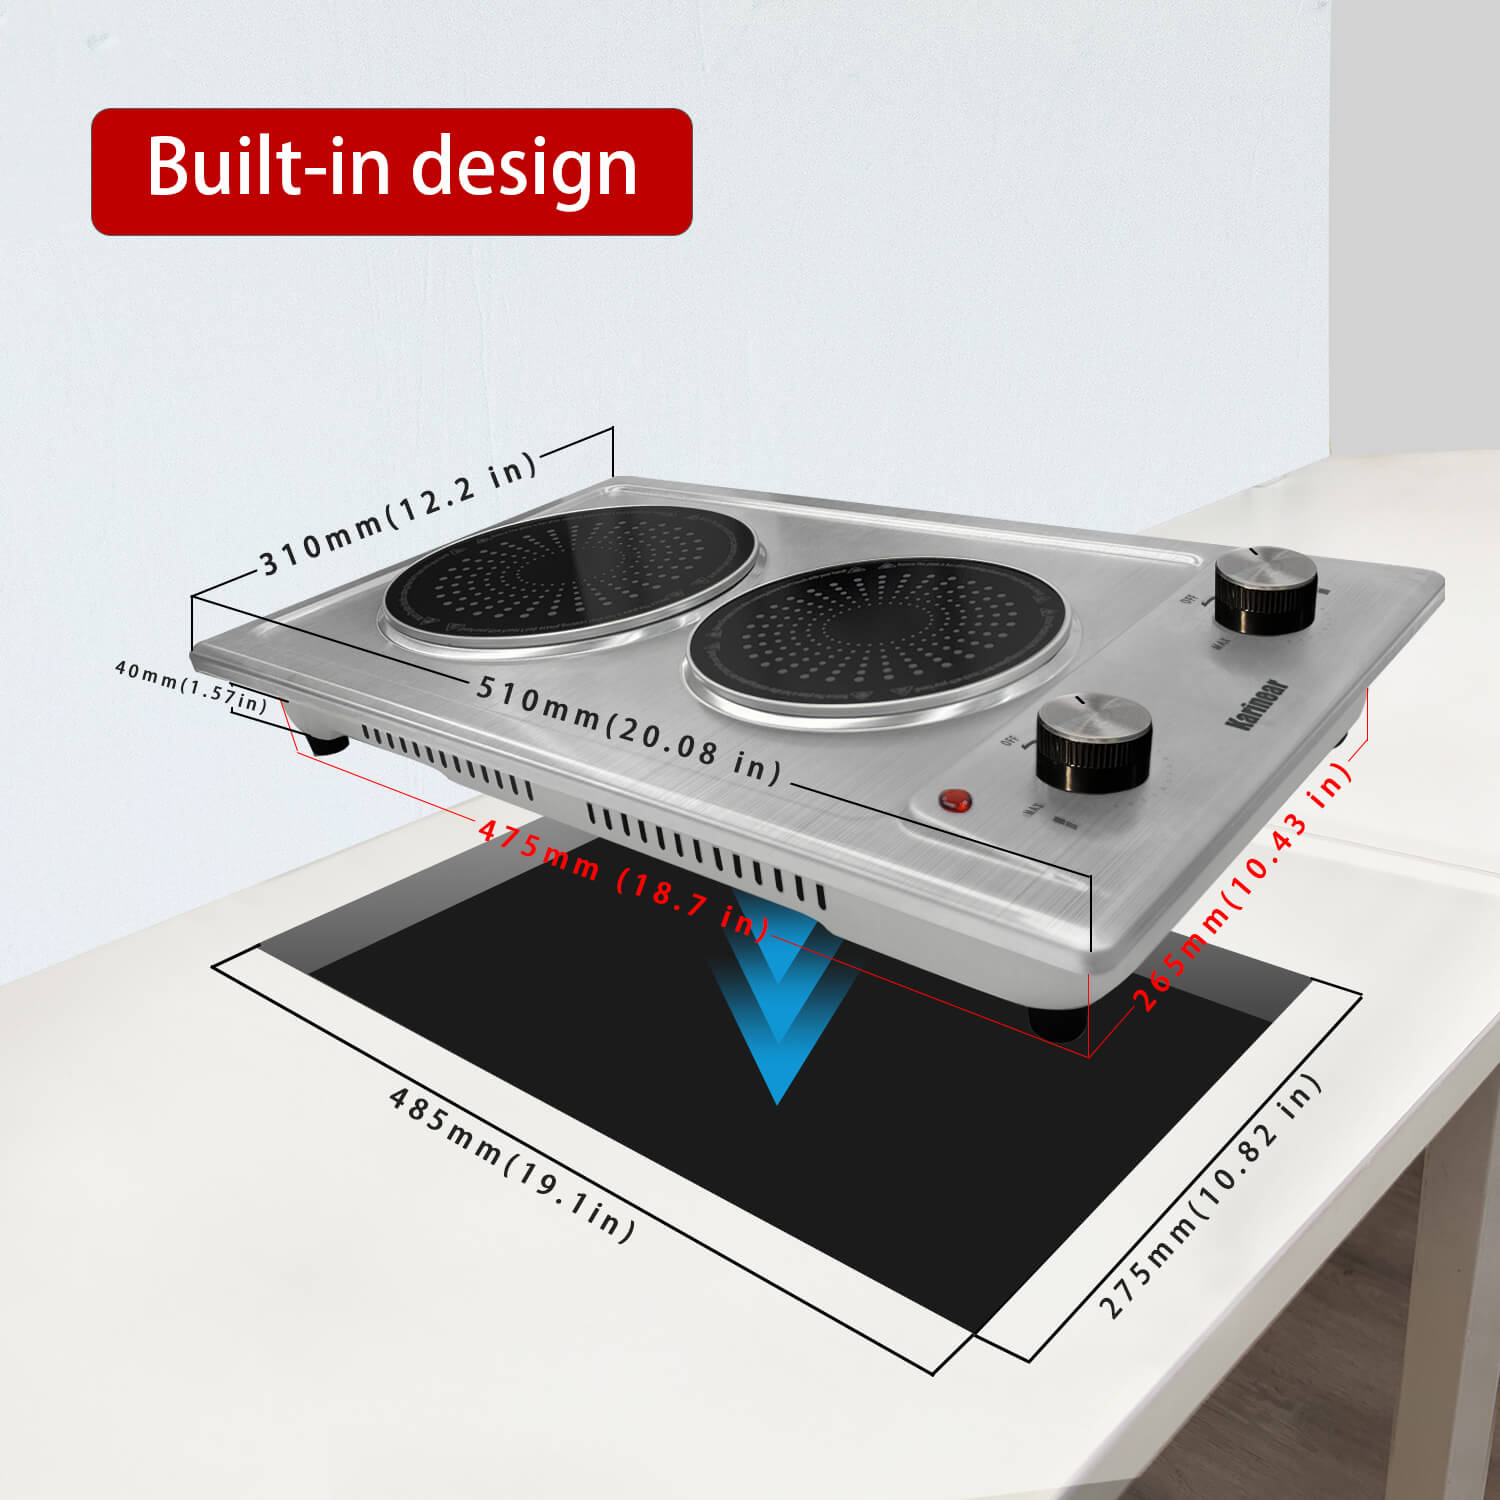 The 2 burners electric cooktop is suitable for 110~120v, with a plug that is suitable for American families, so you needn't to spend more money to find electricians to help with wiring. More conveniently,